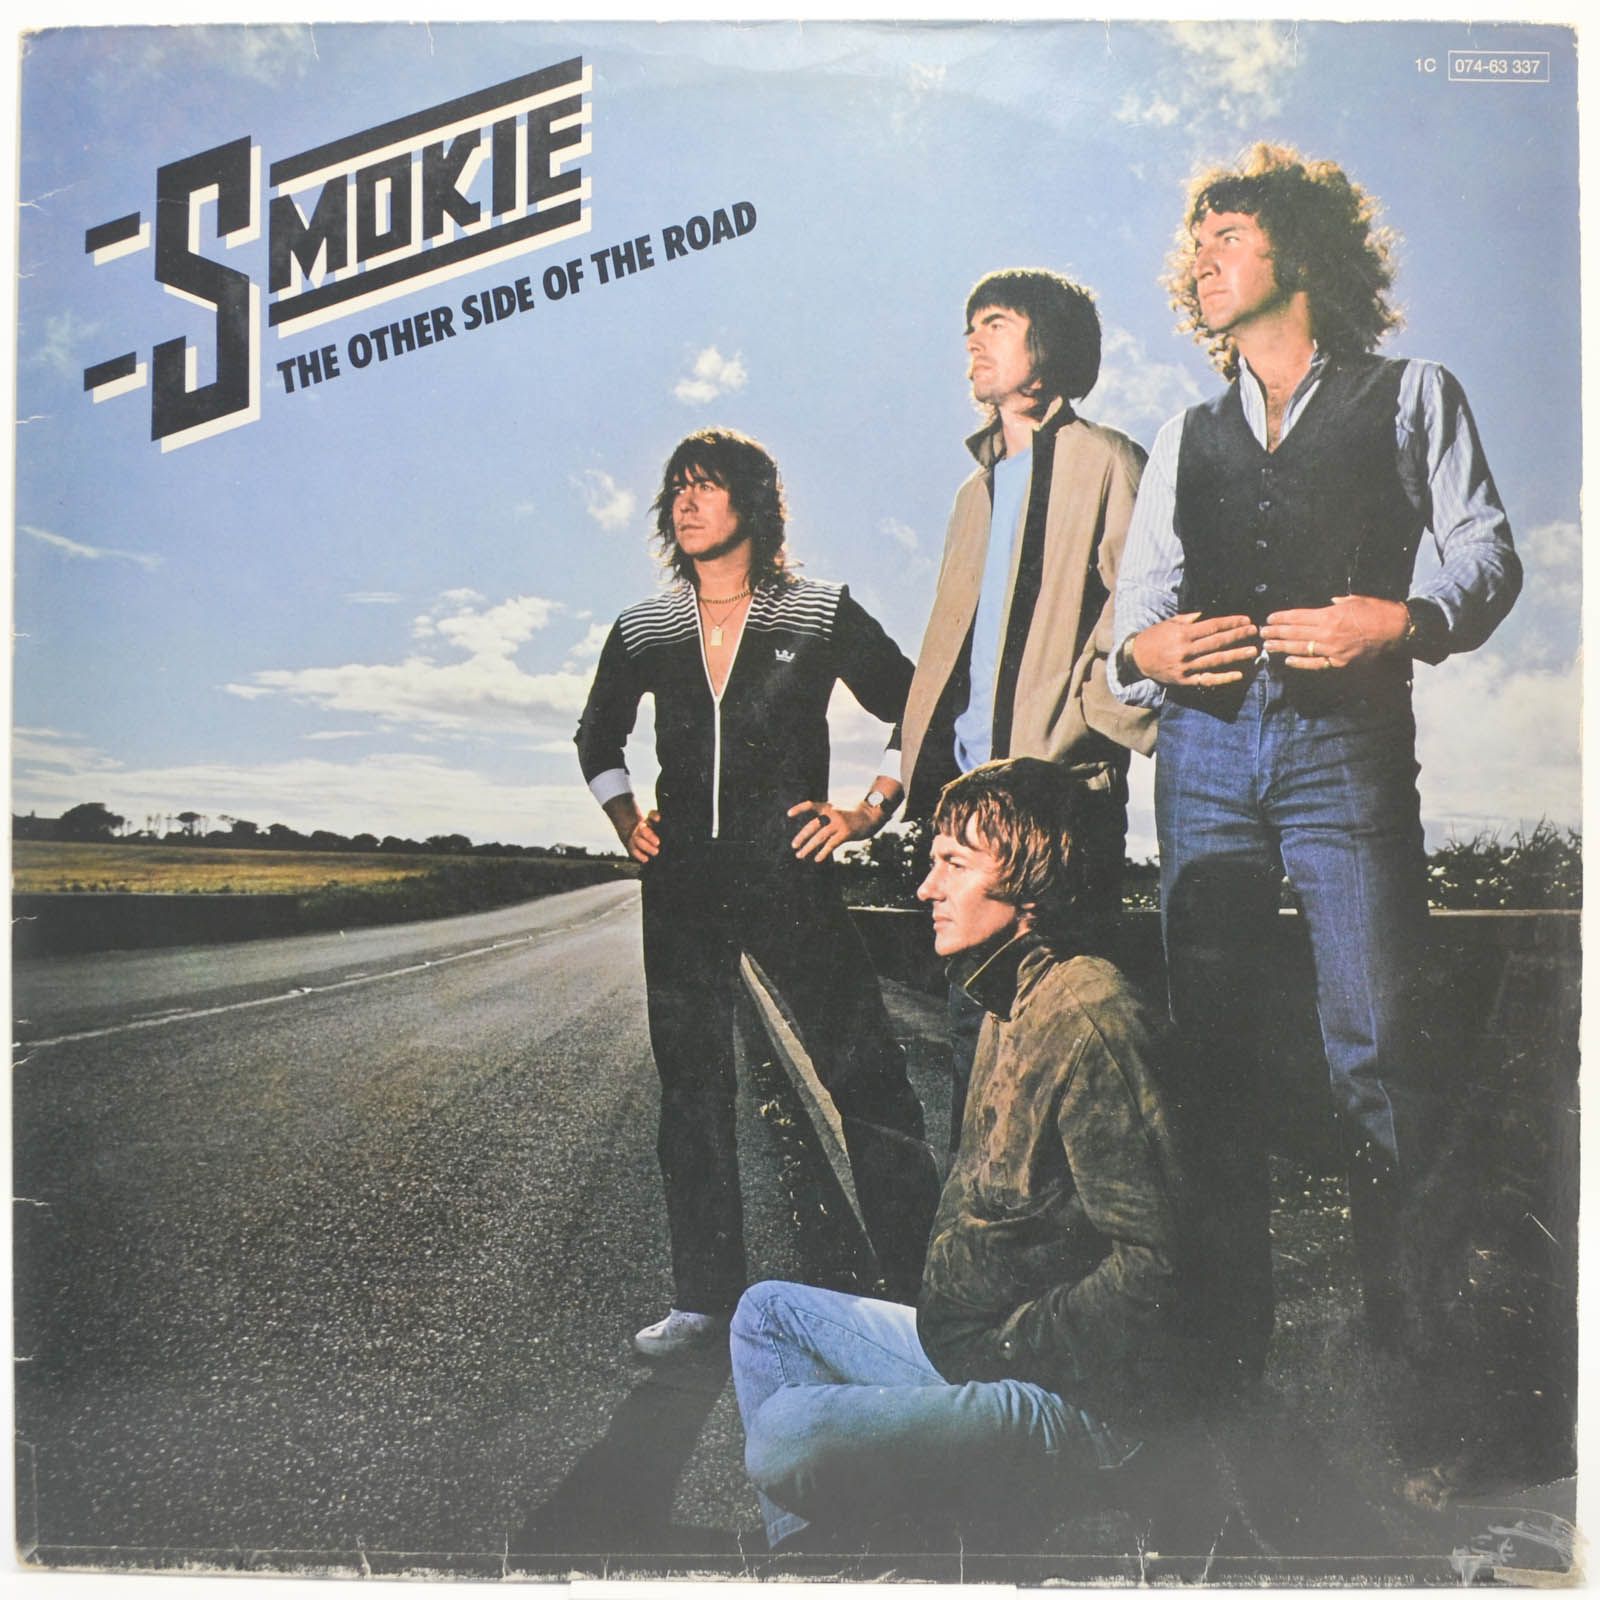 Smokie — The Other Side Of The Road, 1979